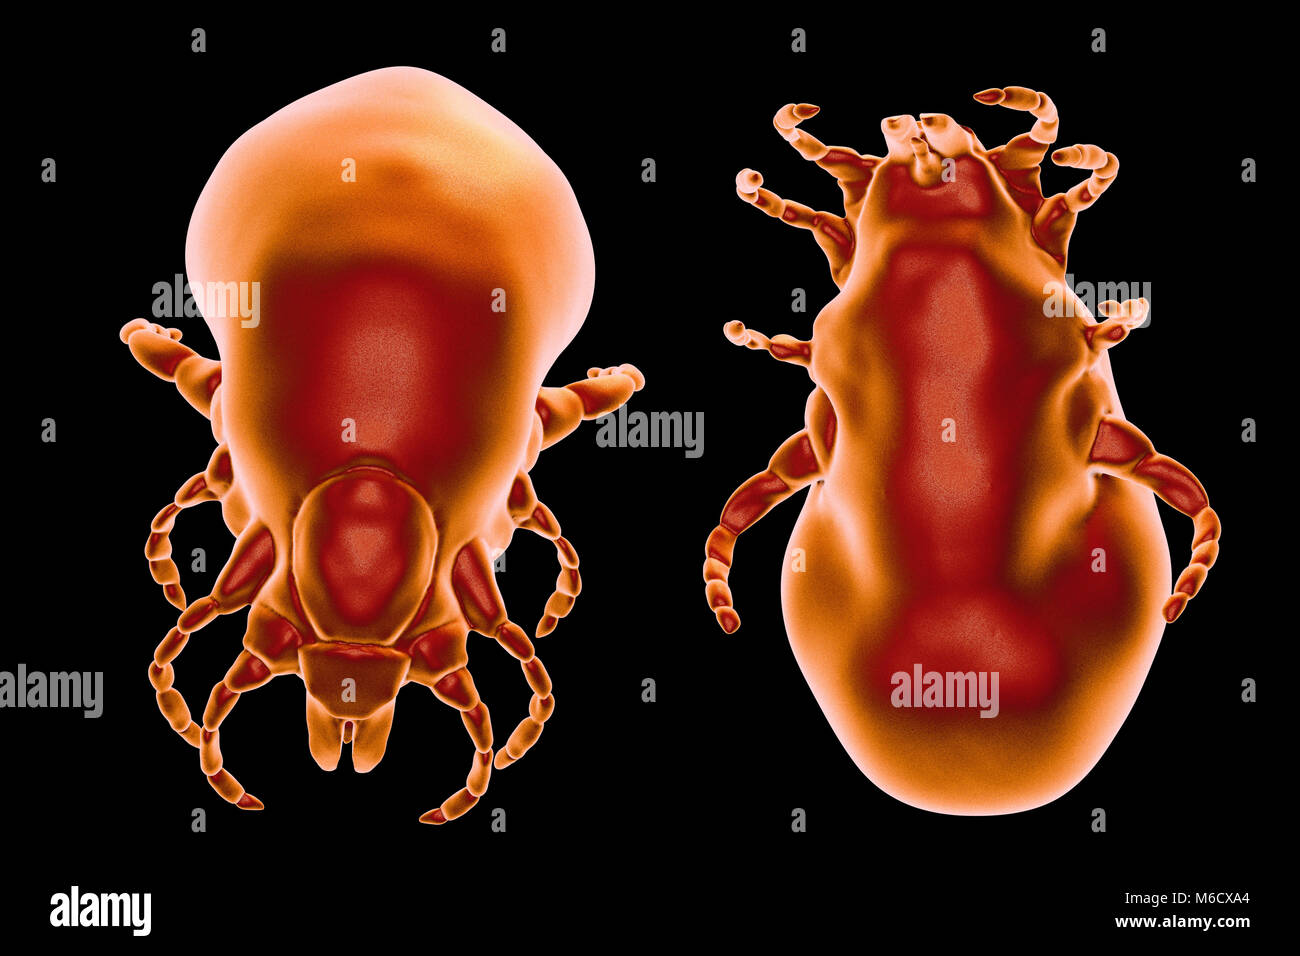 Lyme disease tick.Computer illustration of female Ixodes ricinus tick,a blood-sucking parasite of humans and the principal vector of Lyme disease in Europe.This tick uses specialised mouthparts to pierce the host's skin and hold fast for several days while it swells with blood,increasing in weight by up to 200 times.The female feeds only three times during her life and can survive for years between meals,spending most of the time hidden in vegetation.Mating takes place just before her final meal,after which she drops to the ground and lays thousands of eggs. Stock Photo